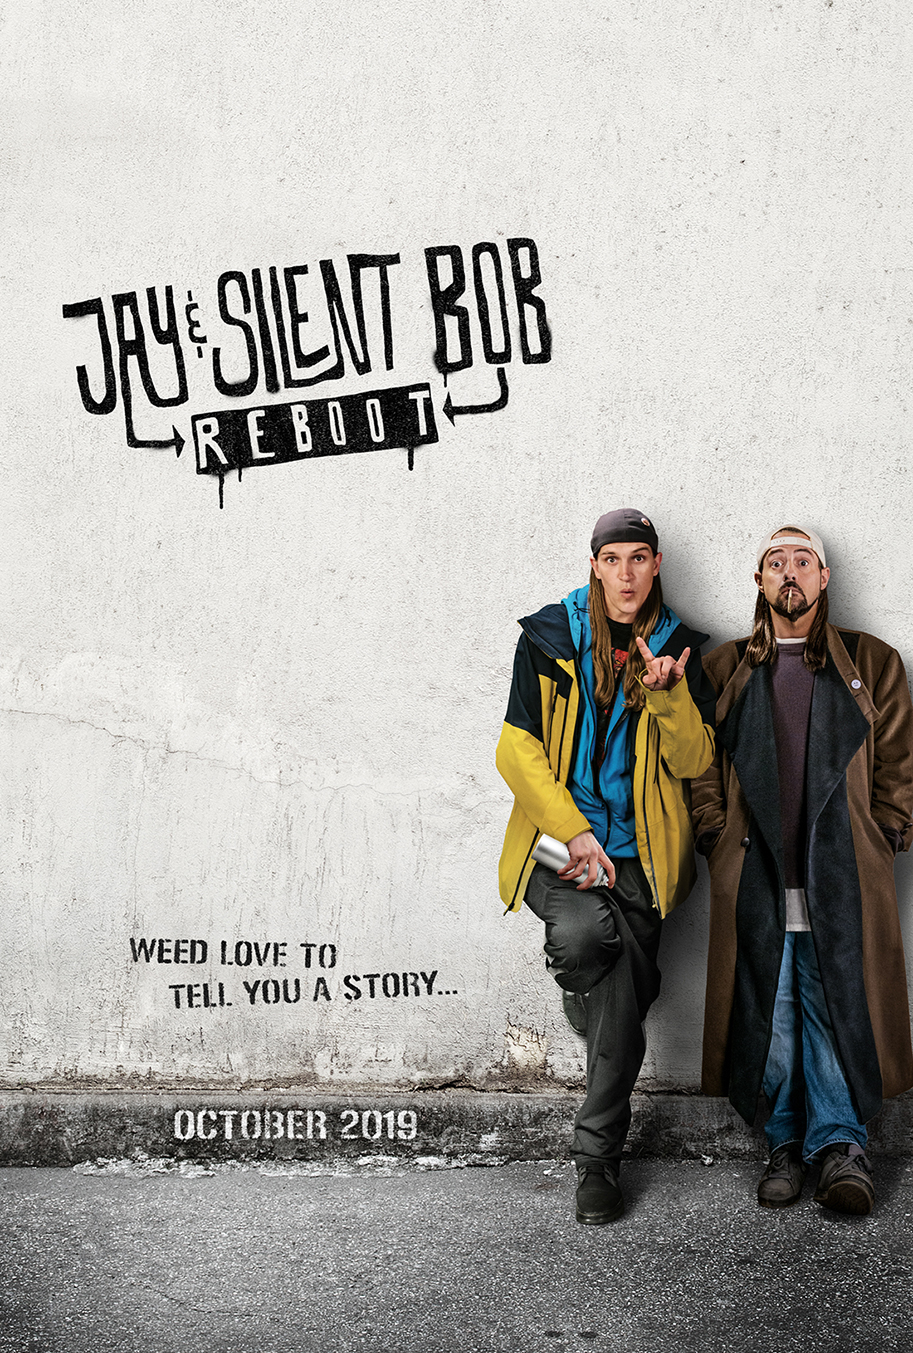 Kevin Smith, Jay and Silent Bob Reboot, trailer